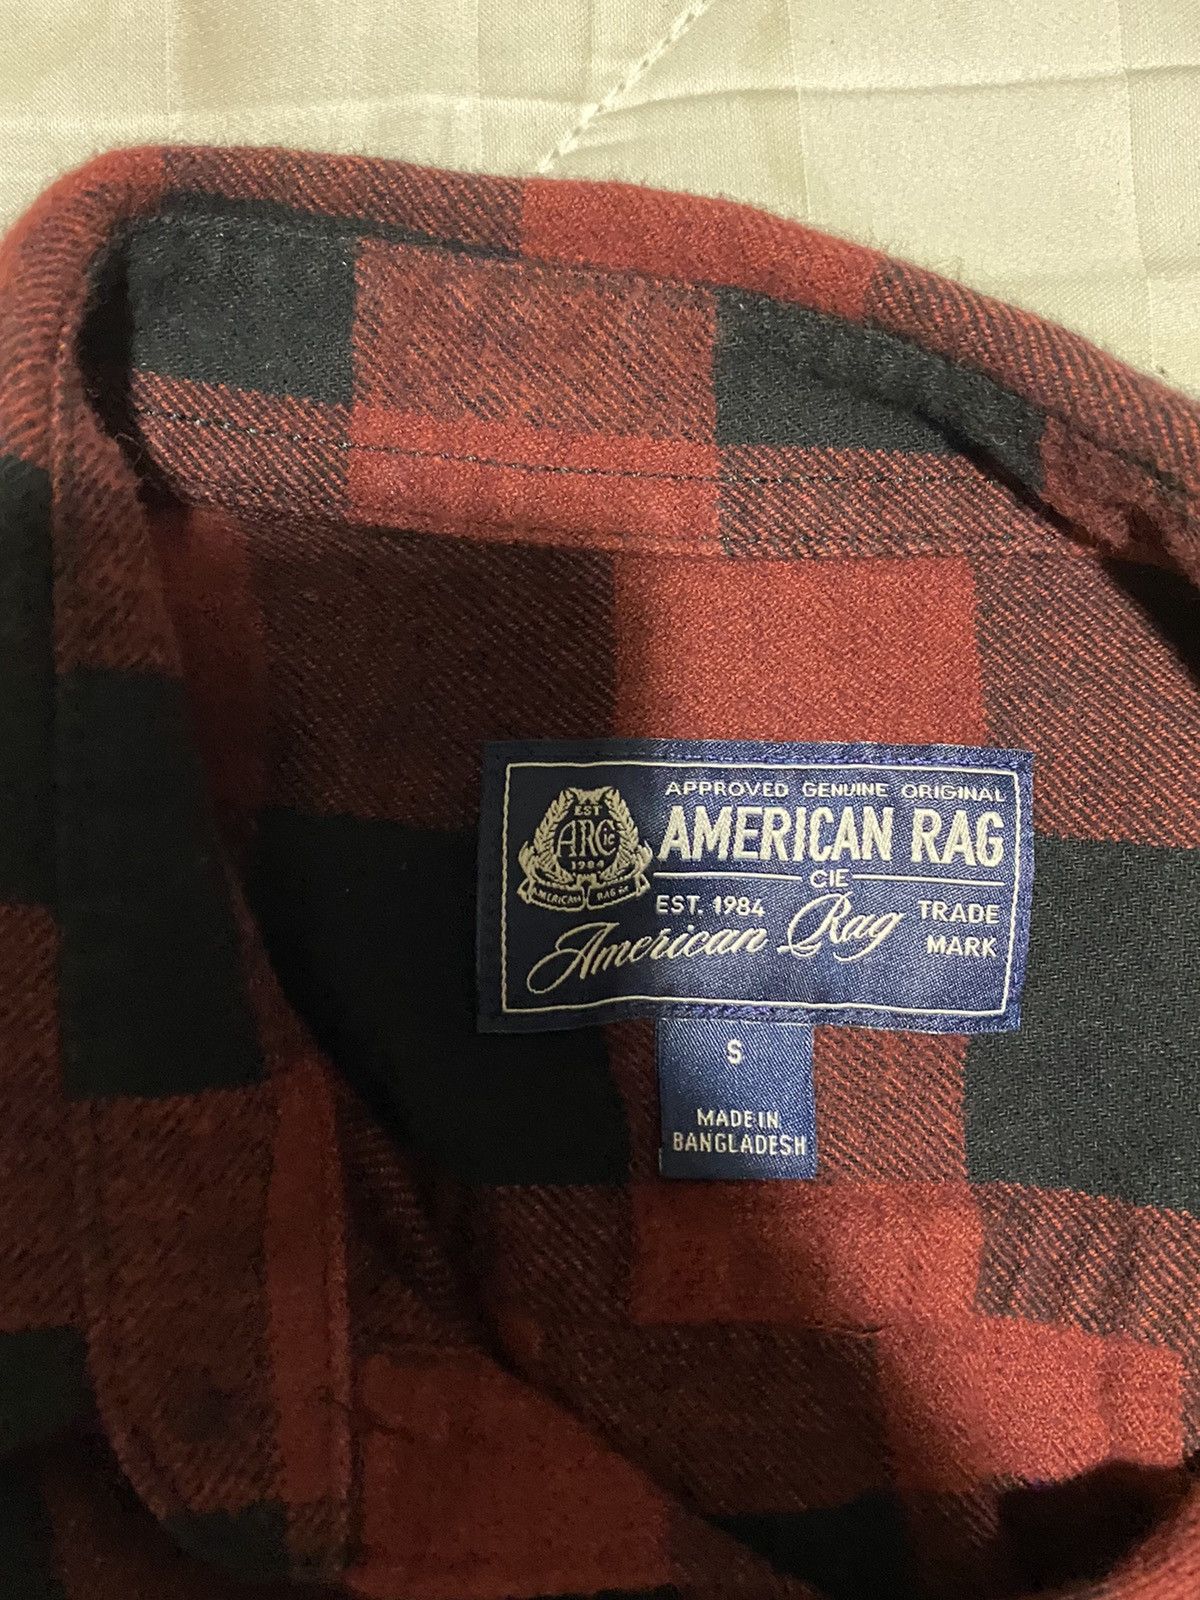 American Rag American Rag Flannel Black and Red Size US S / EU 44-46 / 1 - 4 Preview